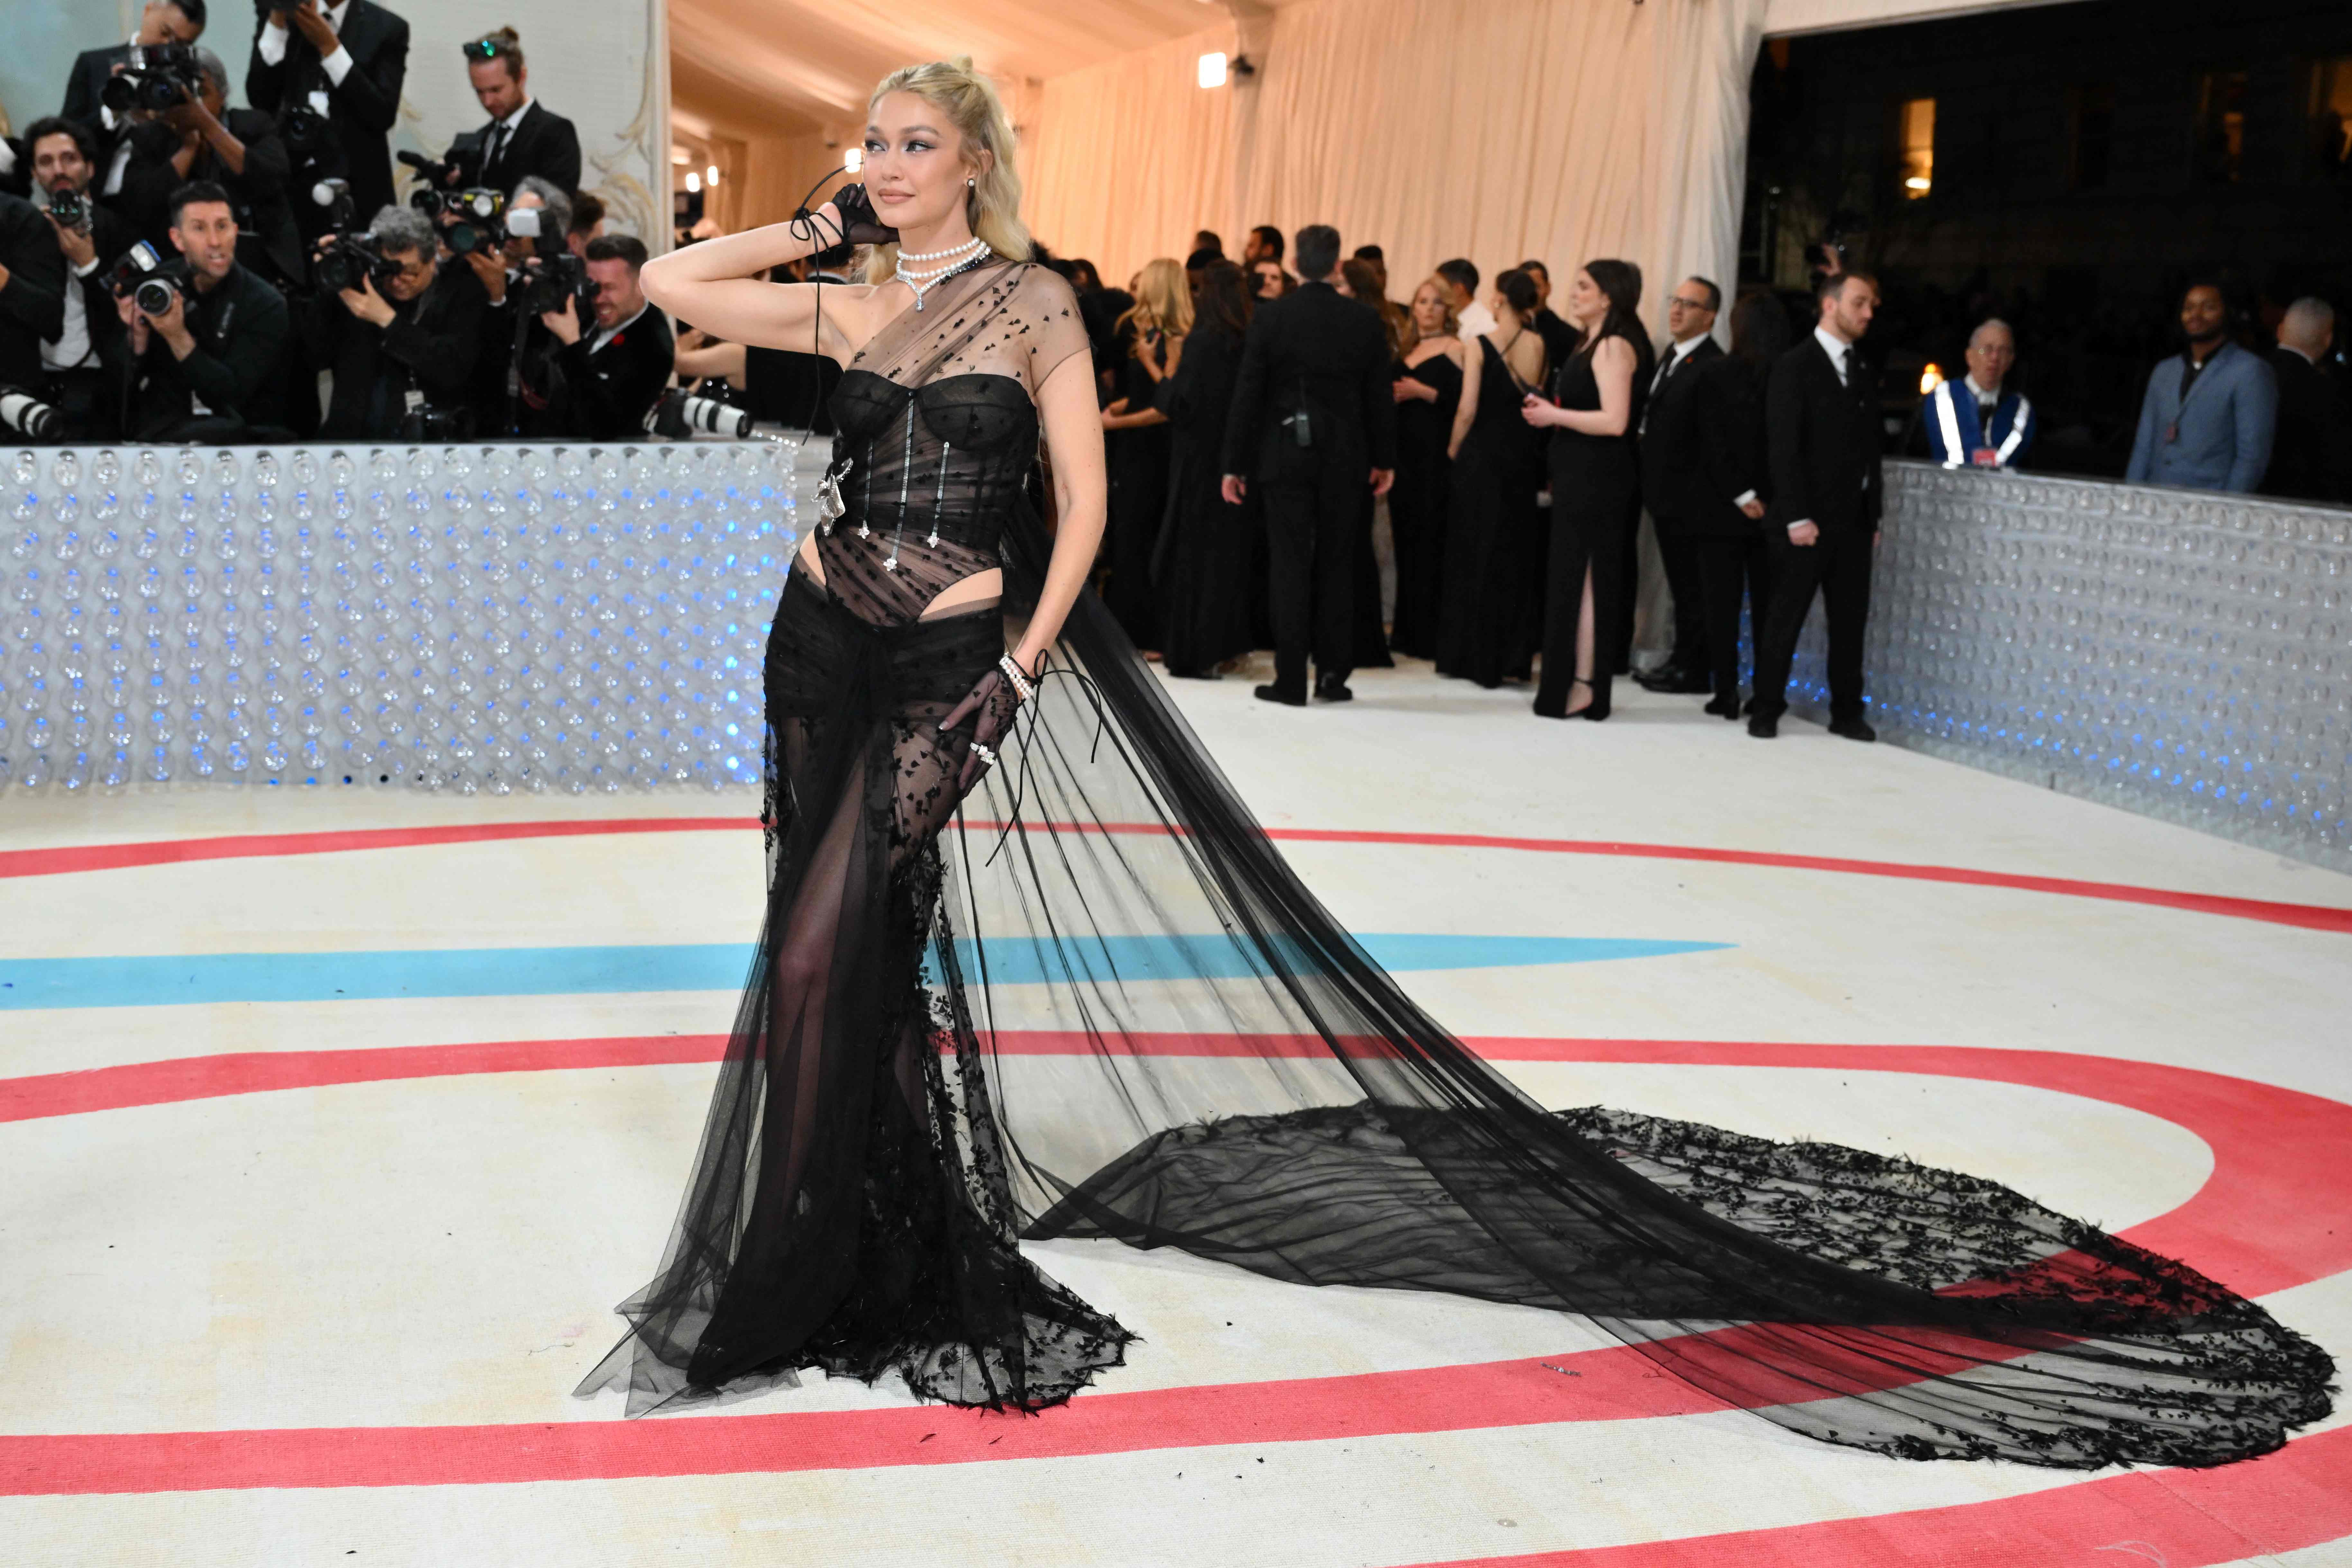 American model Gigi Hadid in a beautiful style at the event - Photo: AFP